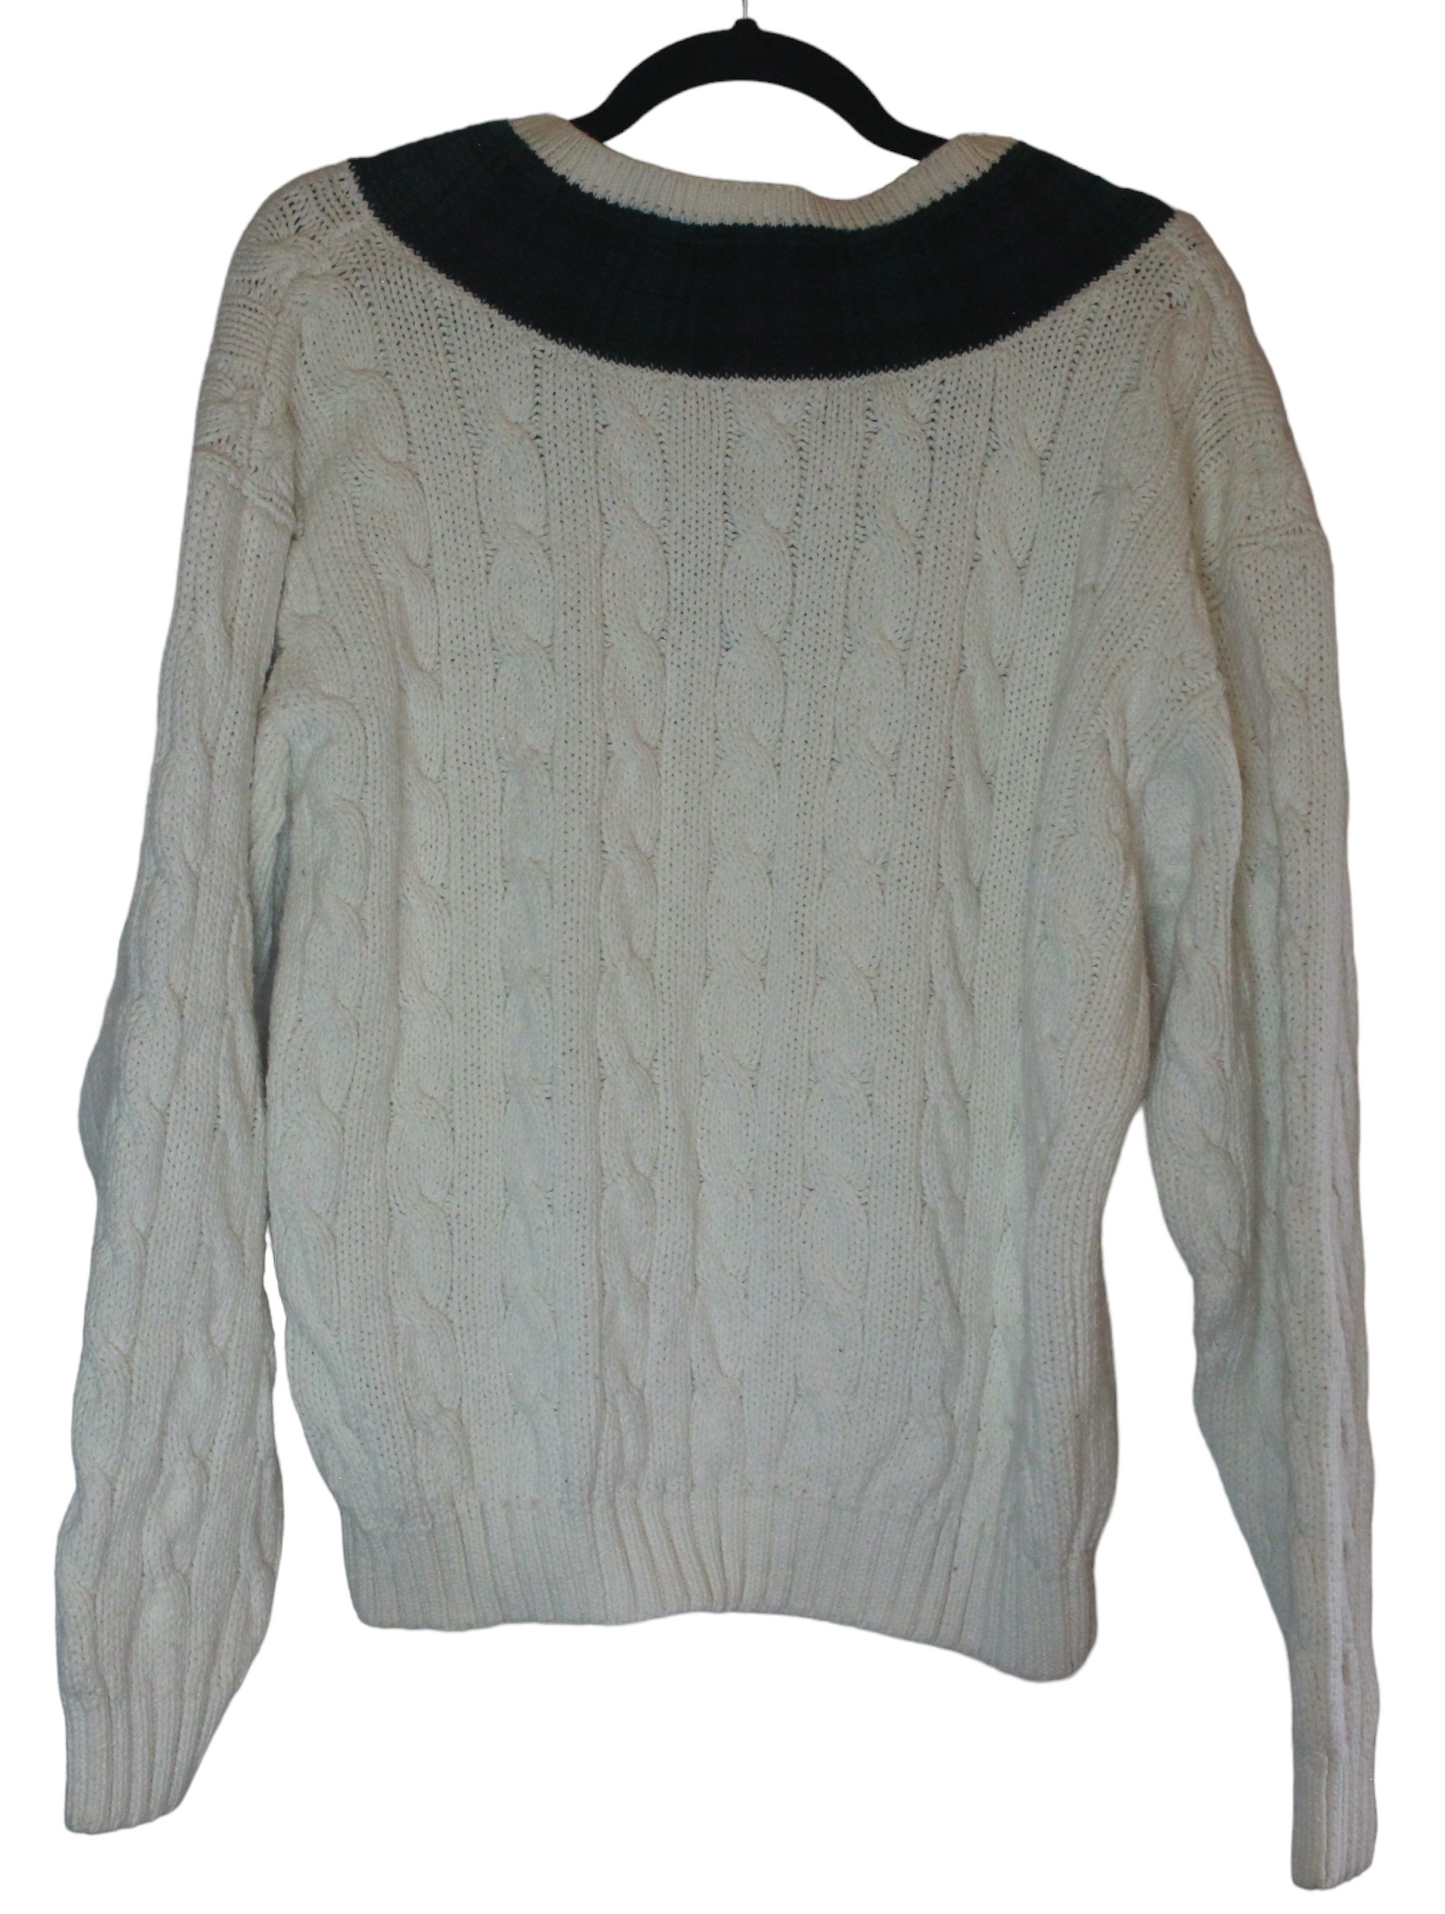 GAP V-Neck Cable Knit Sweater